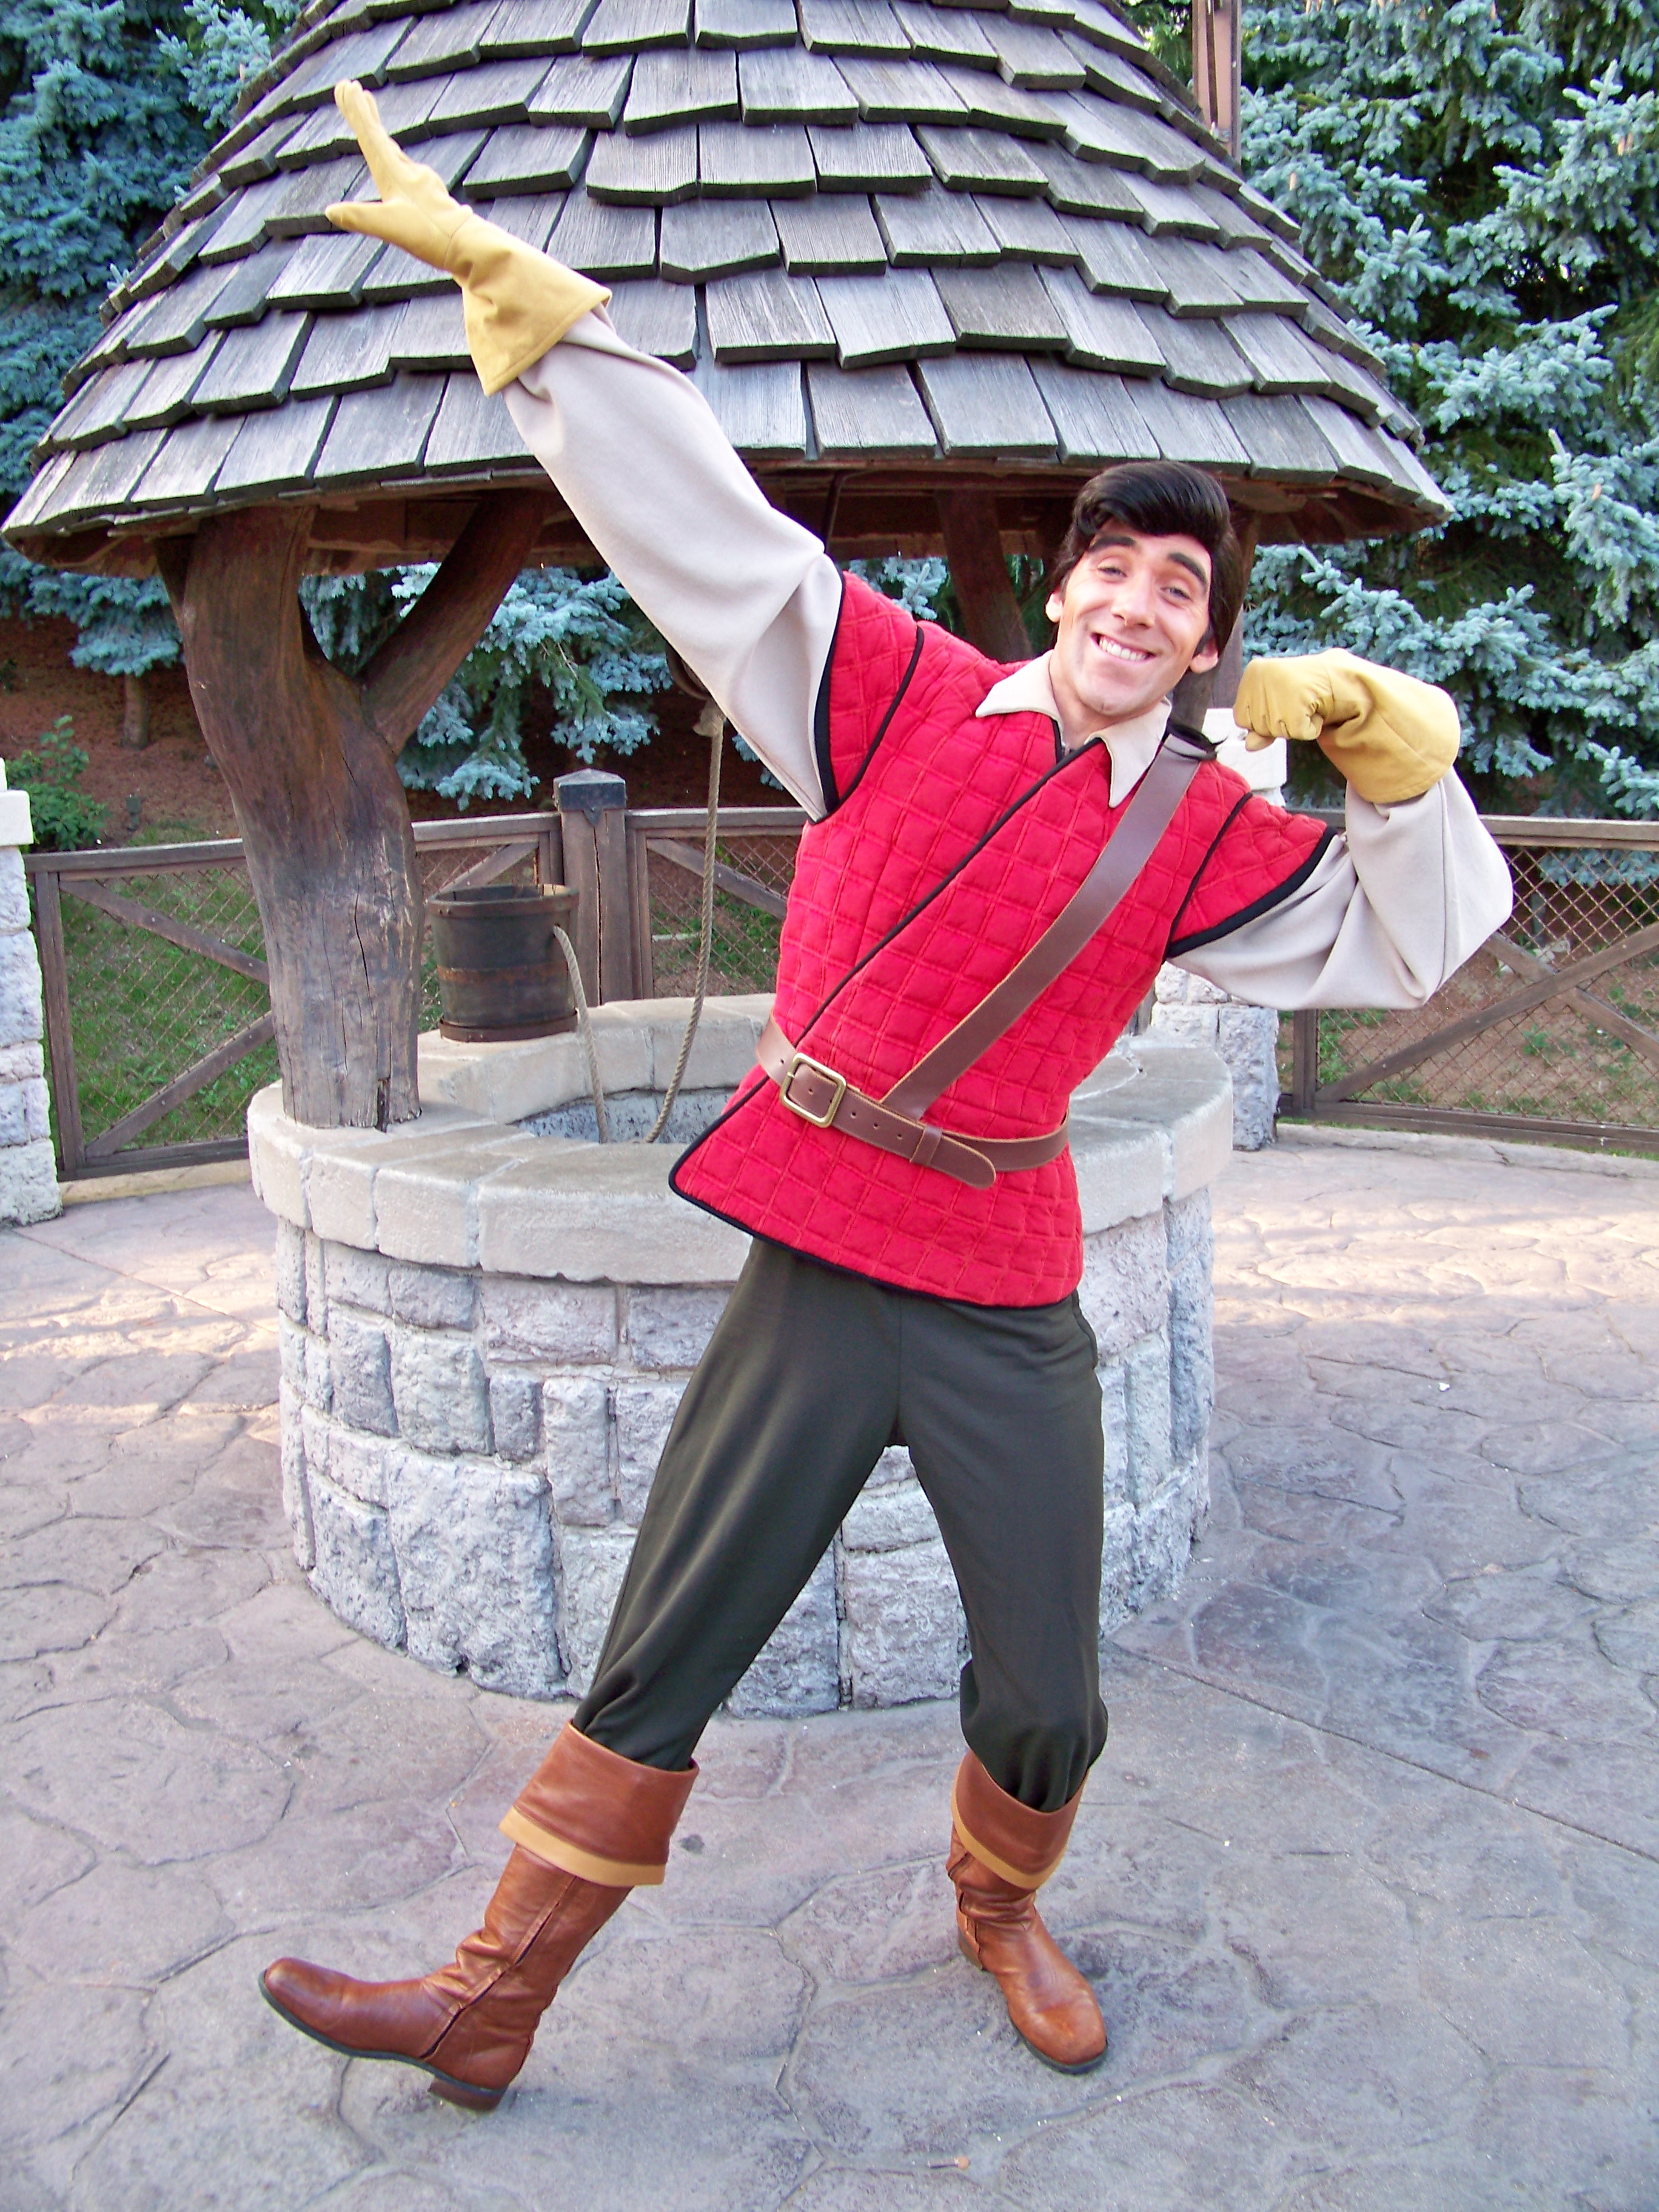 Gaston showing his moves in Fantasyland. Gaston can be found at the Walt Disney Studios Park in the mornings nowadays.